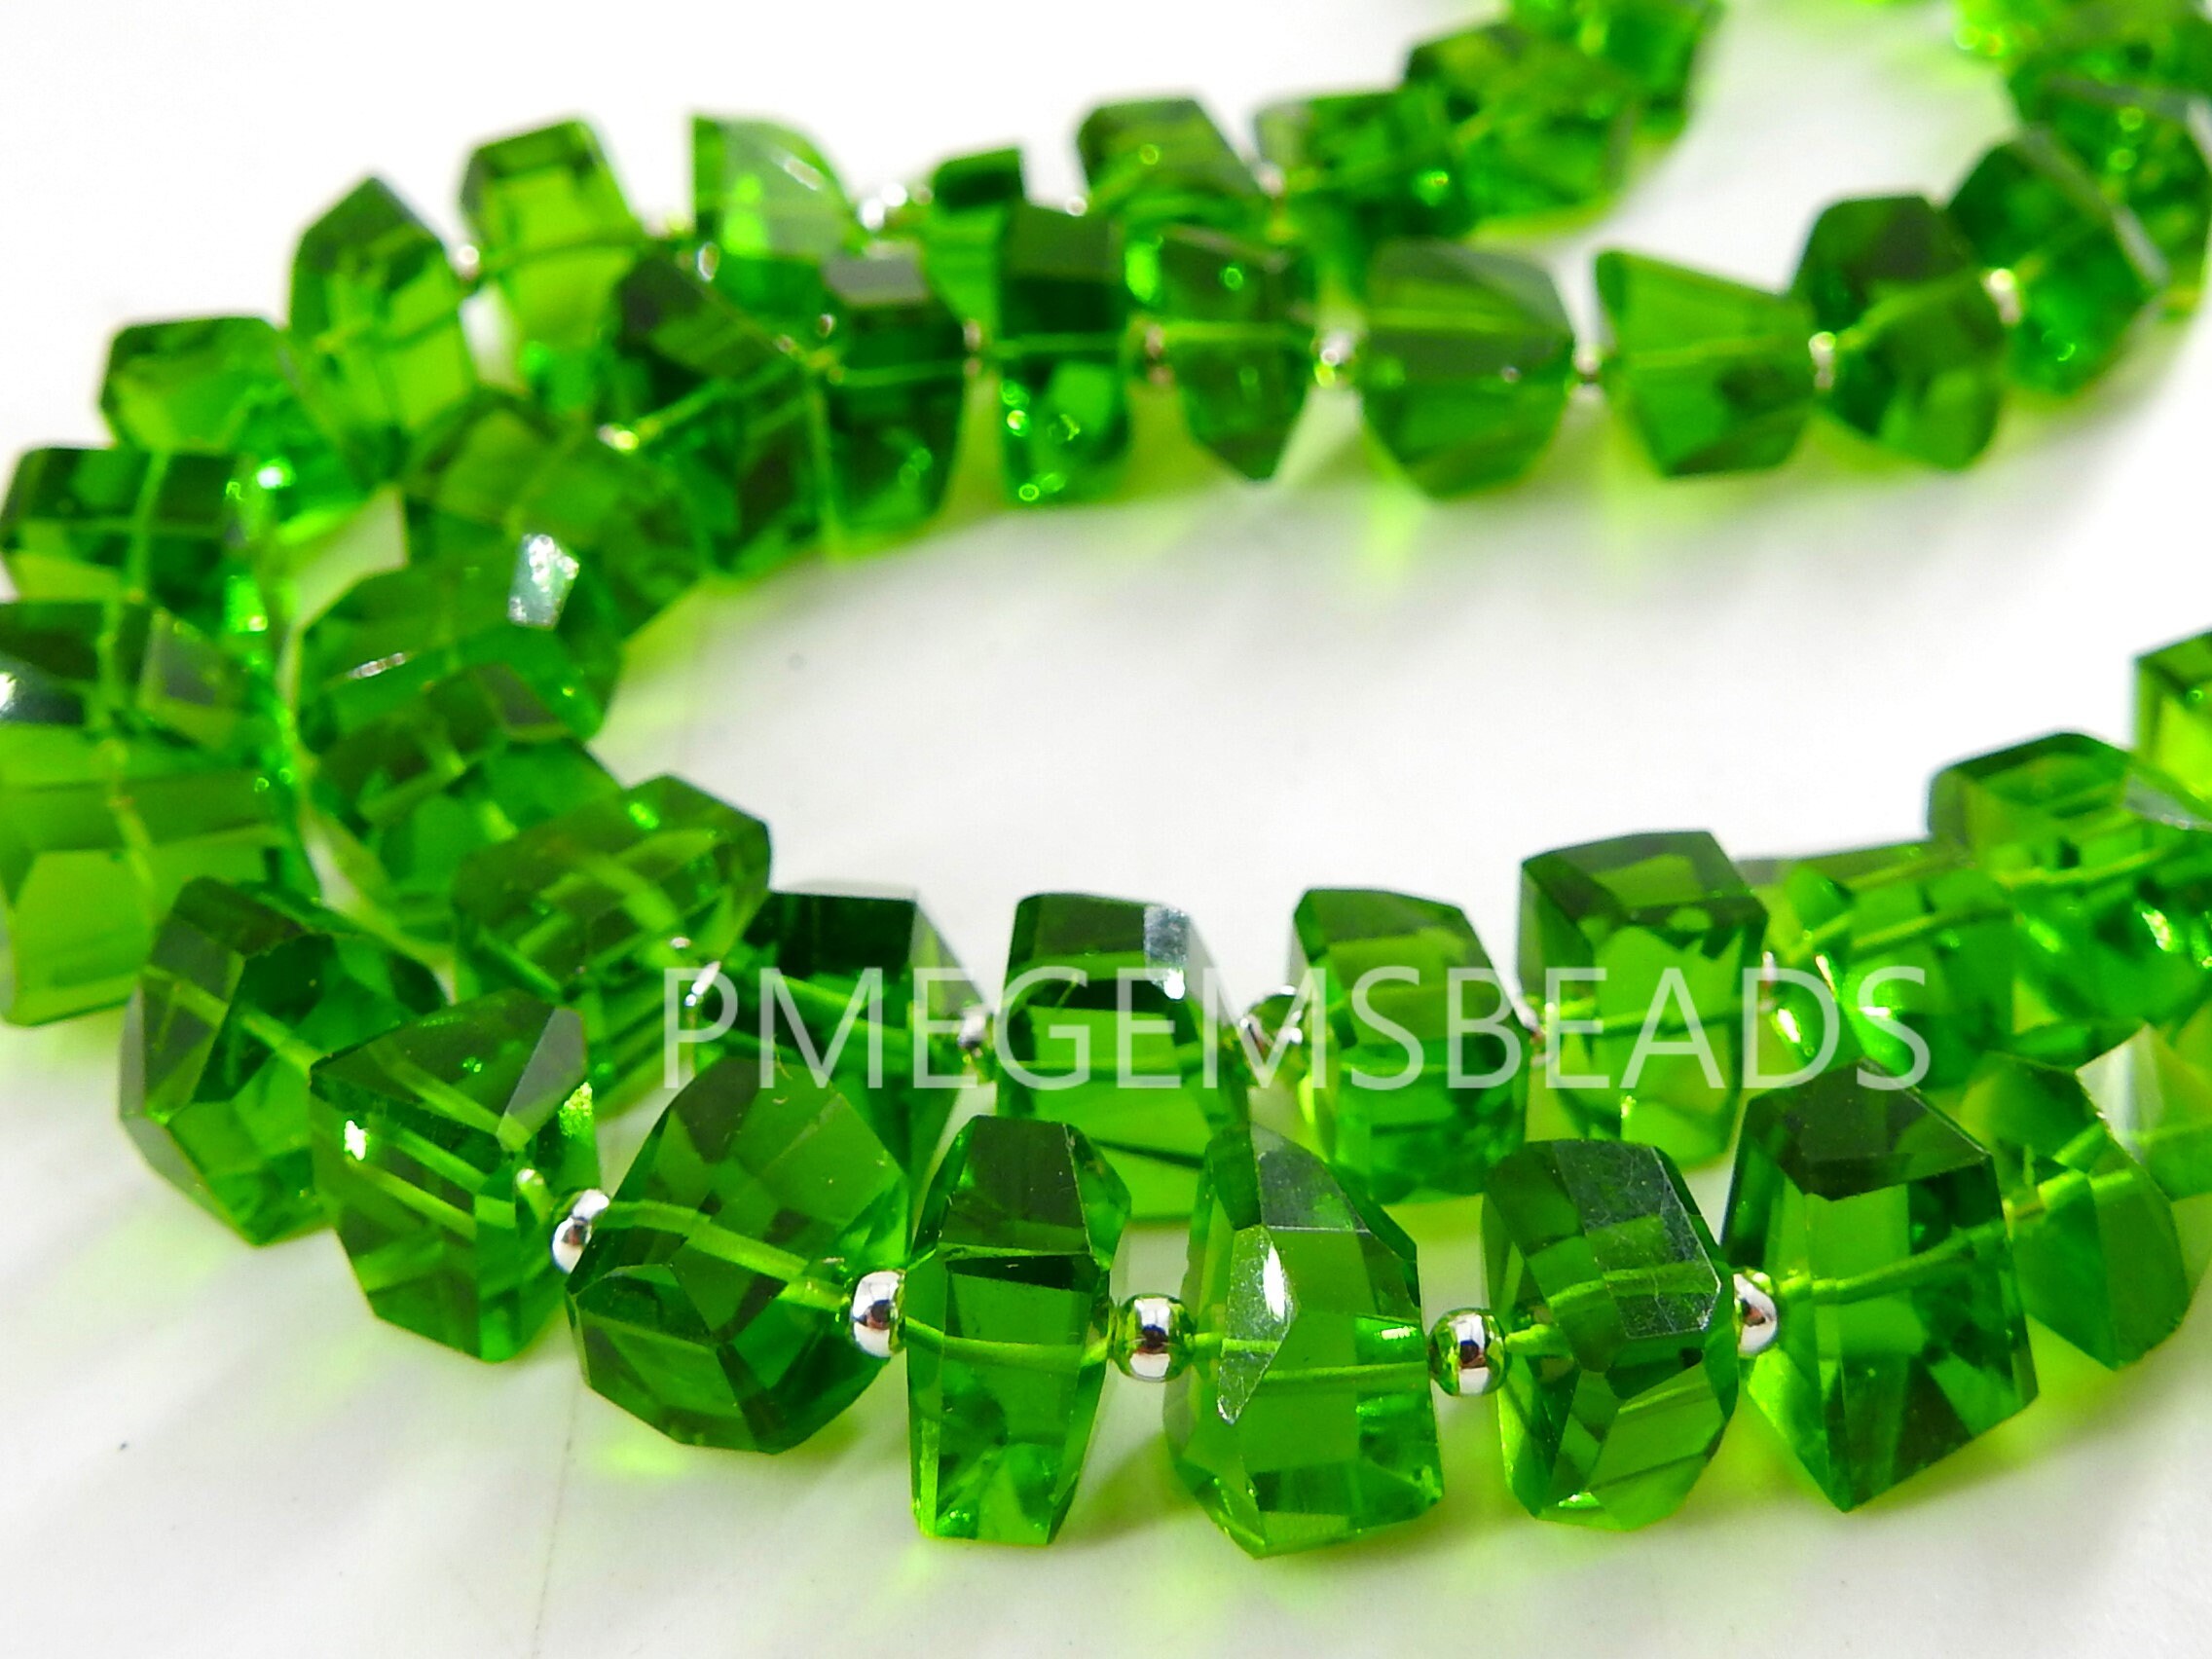 Chrome Green Quartz Faceted Tumble,Nugget,Hydro,Irregular,Loose Stone,For Making Jewelry,Necklace,Bracelet 8Inch 8-10MM Approx (pme) | Save 33% - Rajasthan Living 15